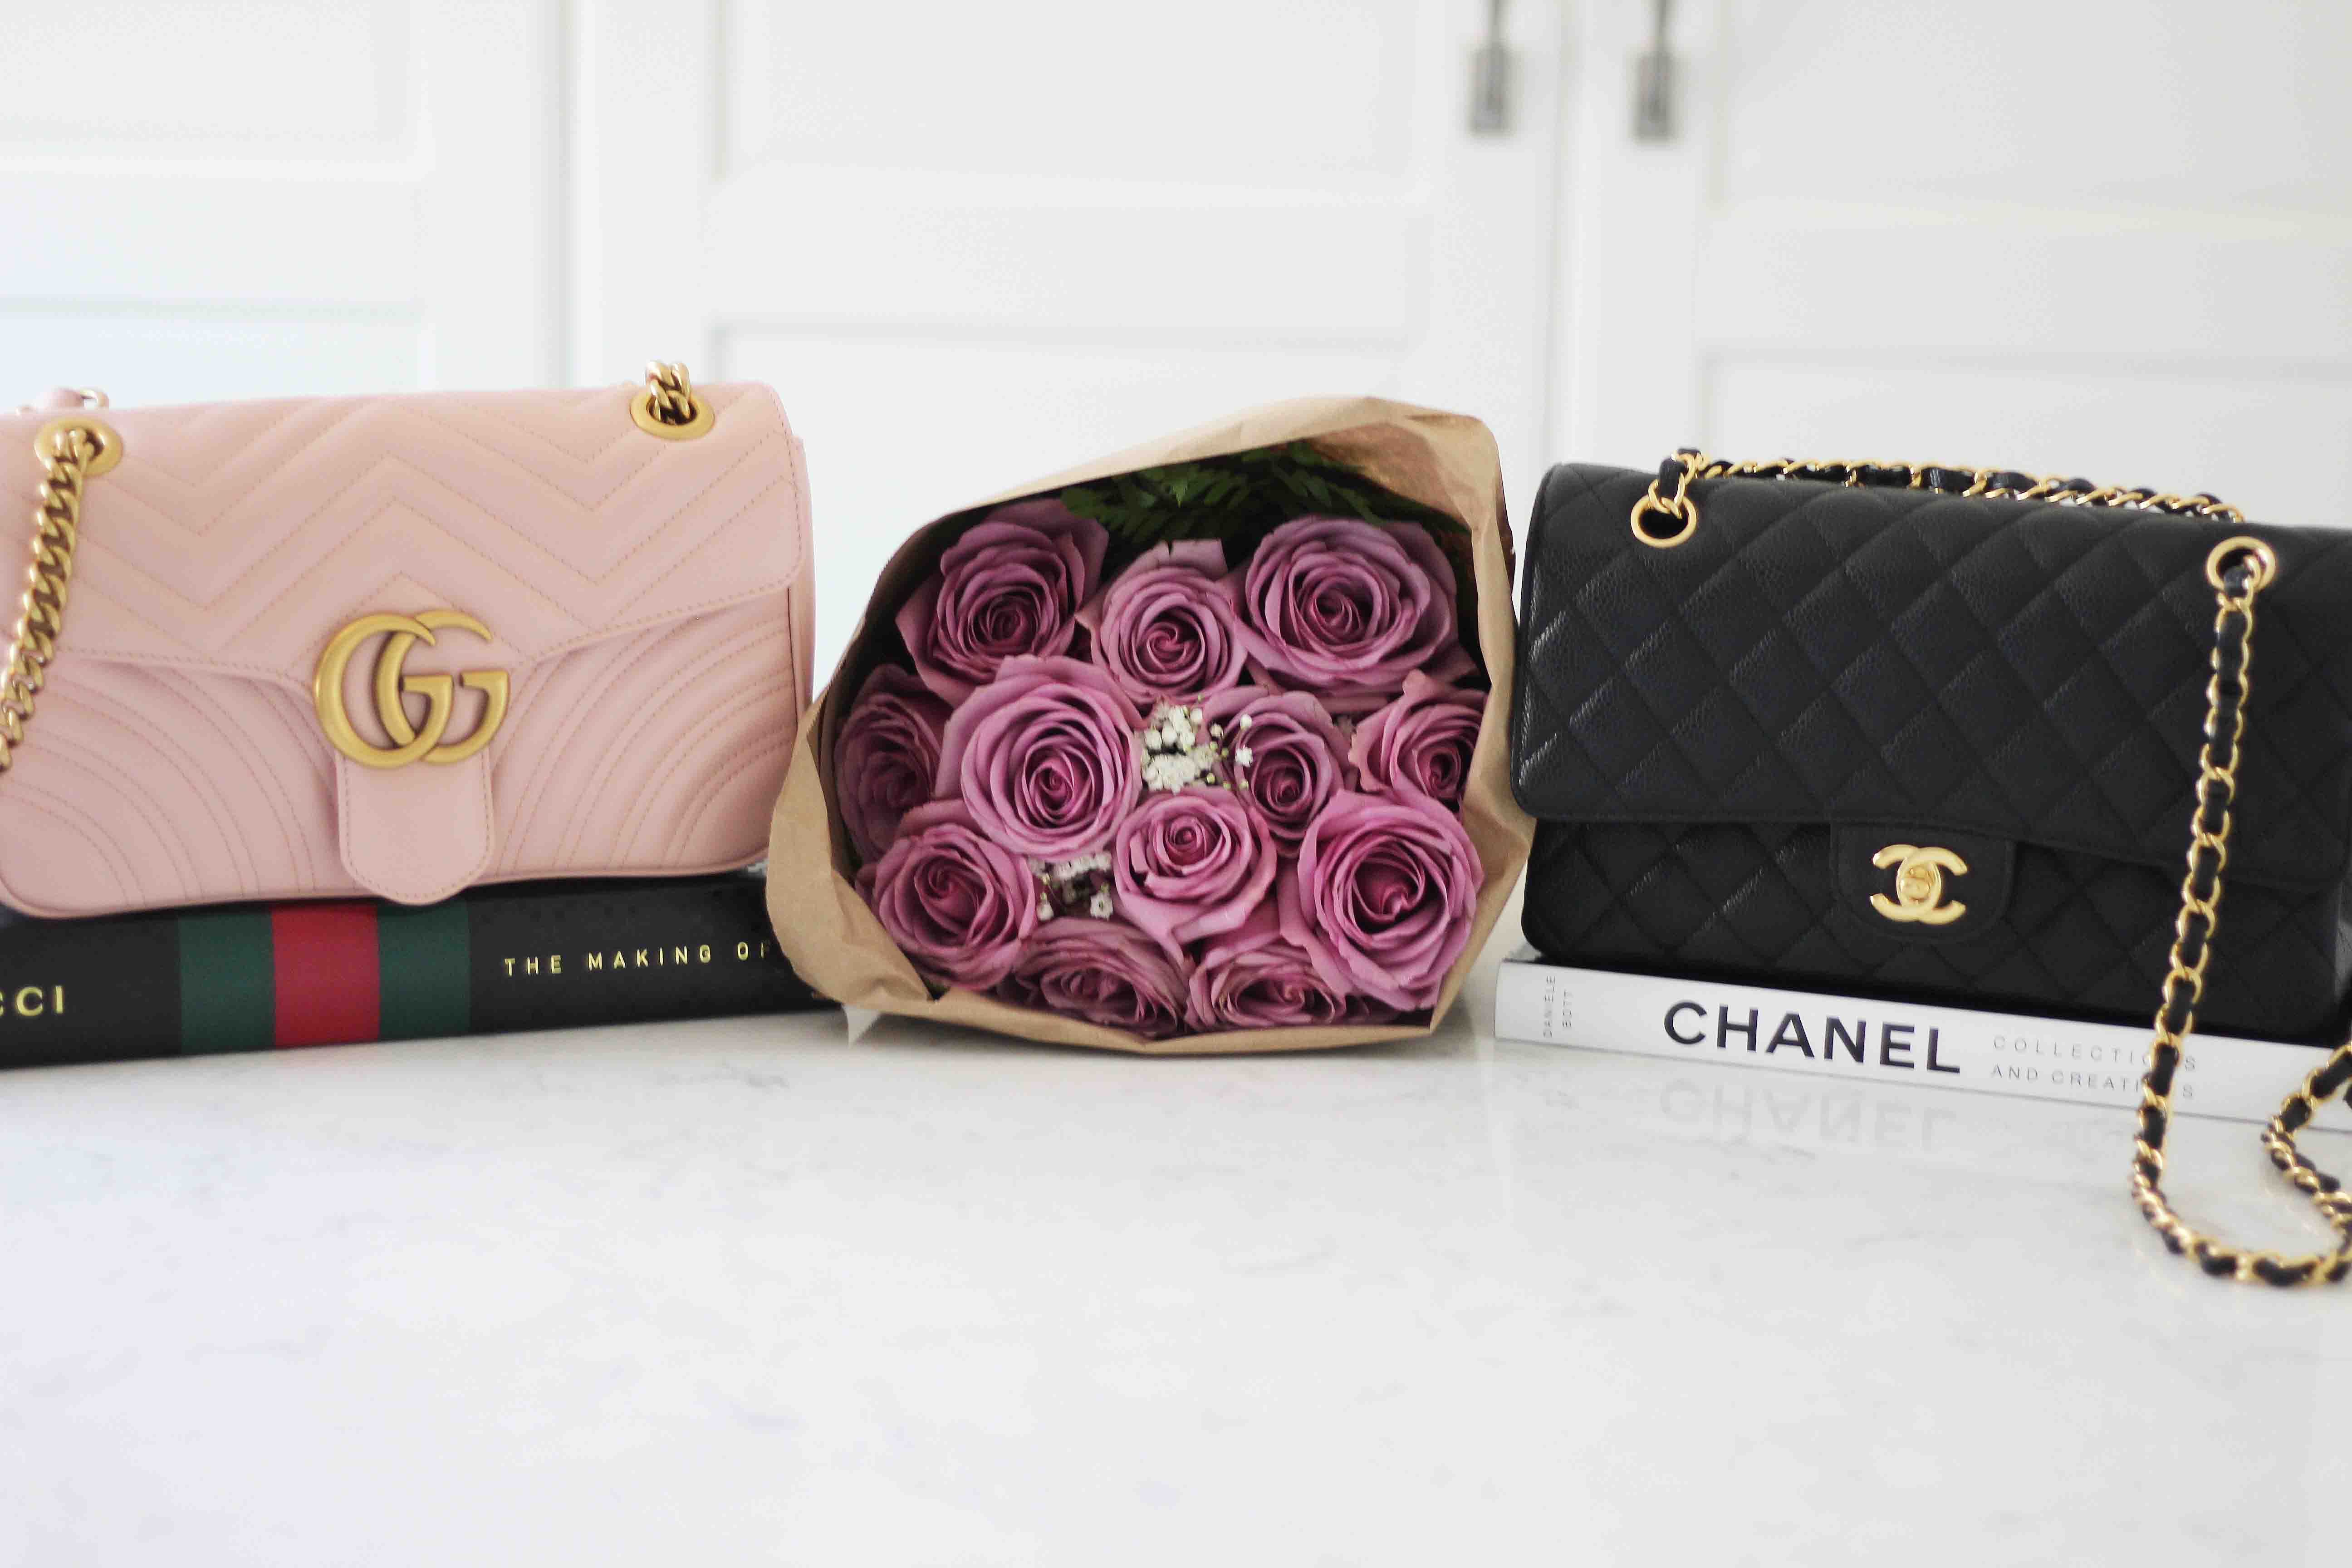 sparkleshinylove Comparing the Gucci GG Matelassé to the Chanel Classic Flap Bag